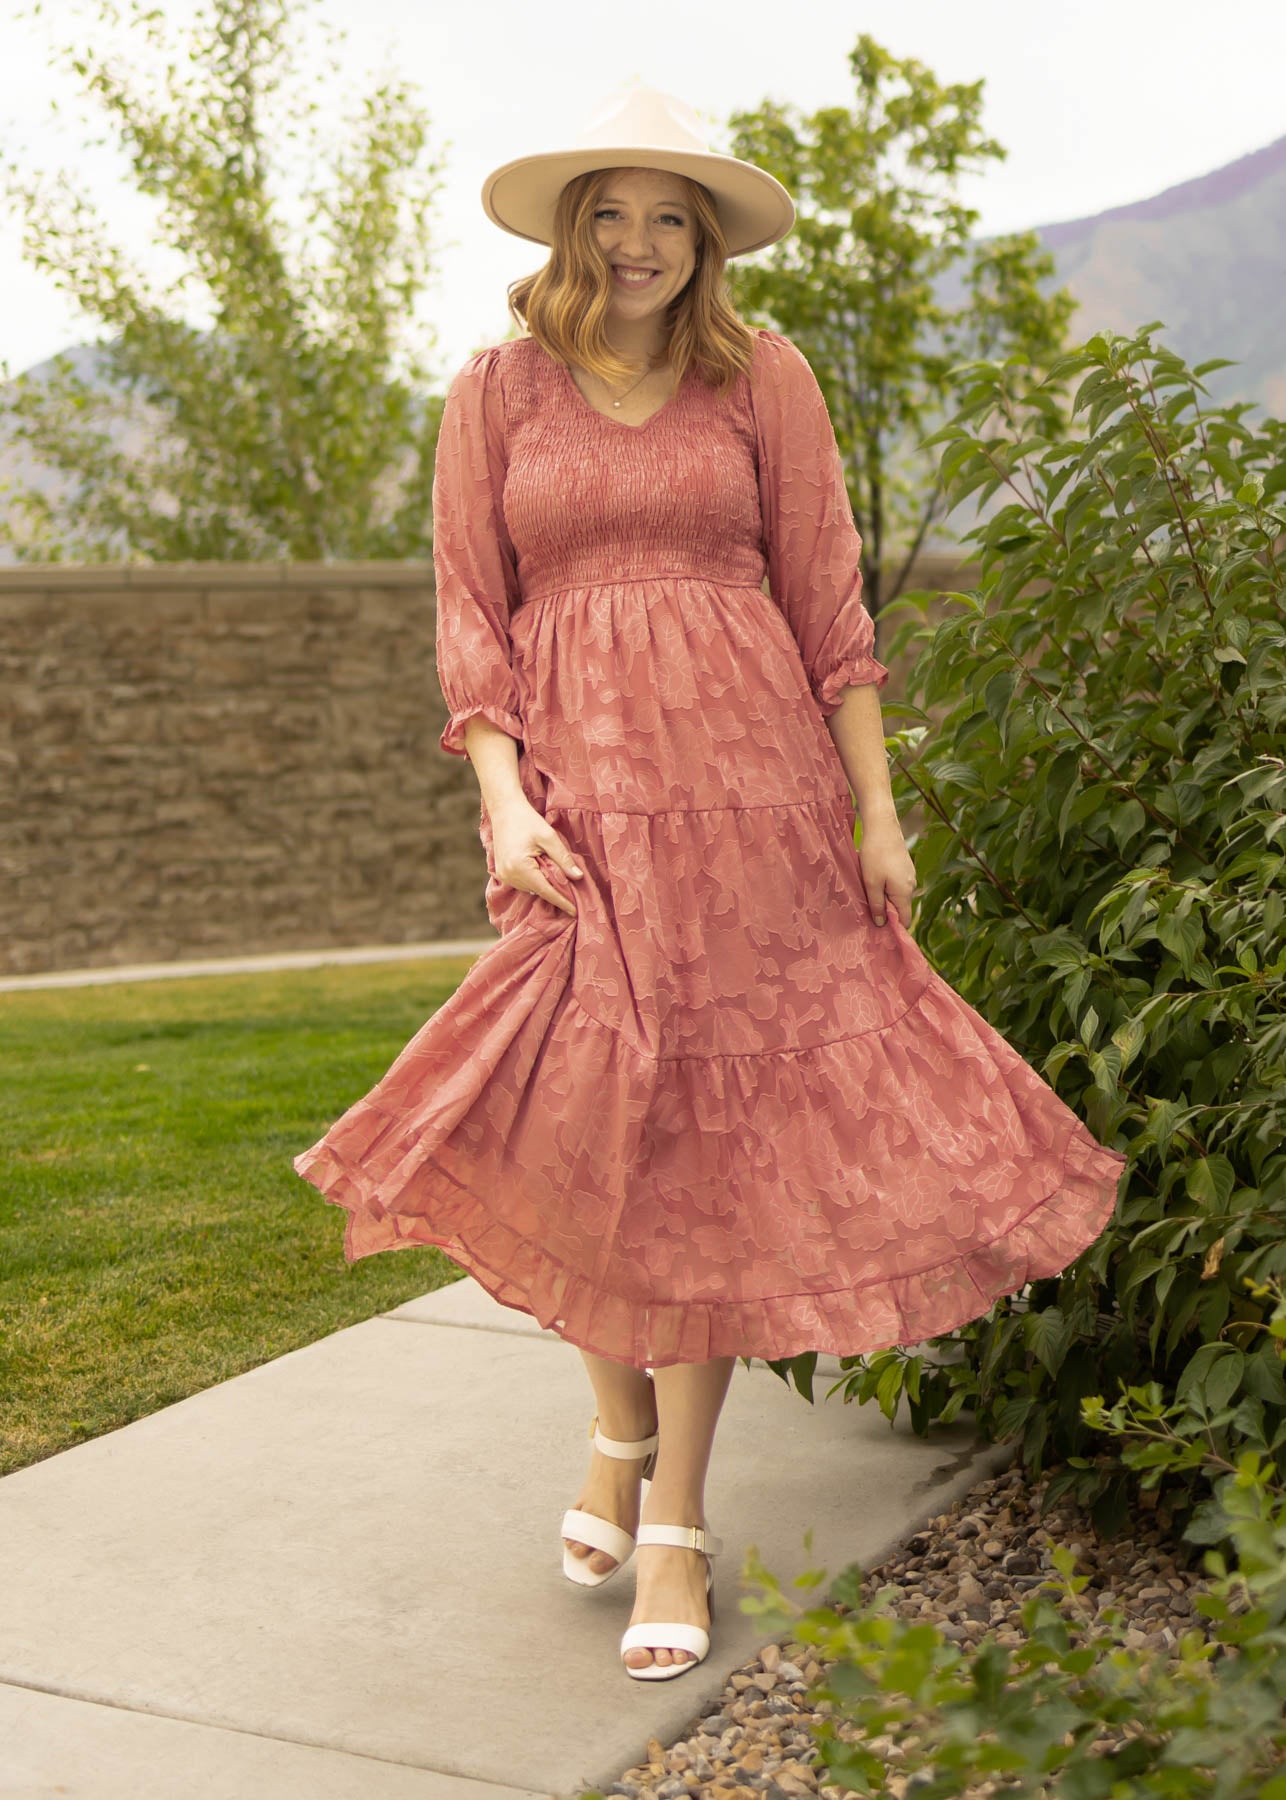 Dusty rose dress with a smocked bodice